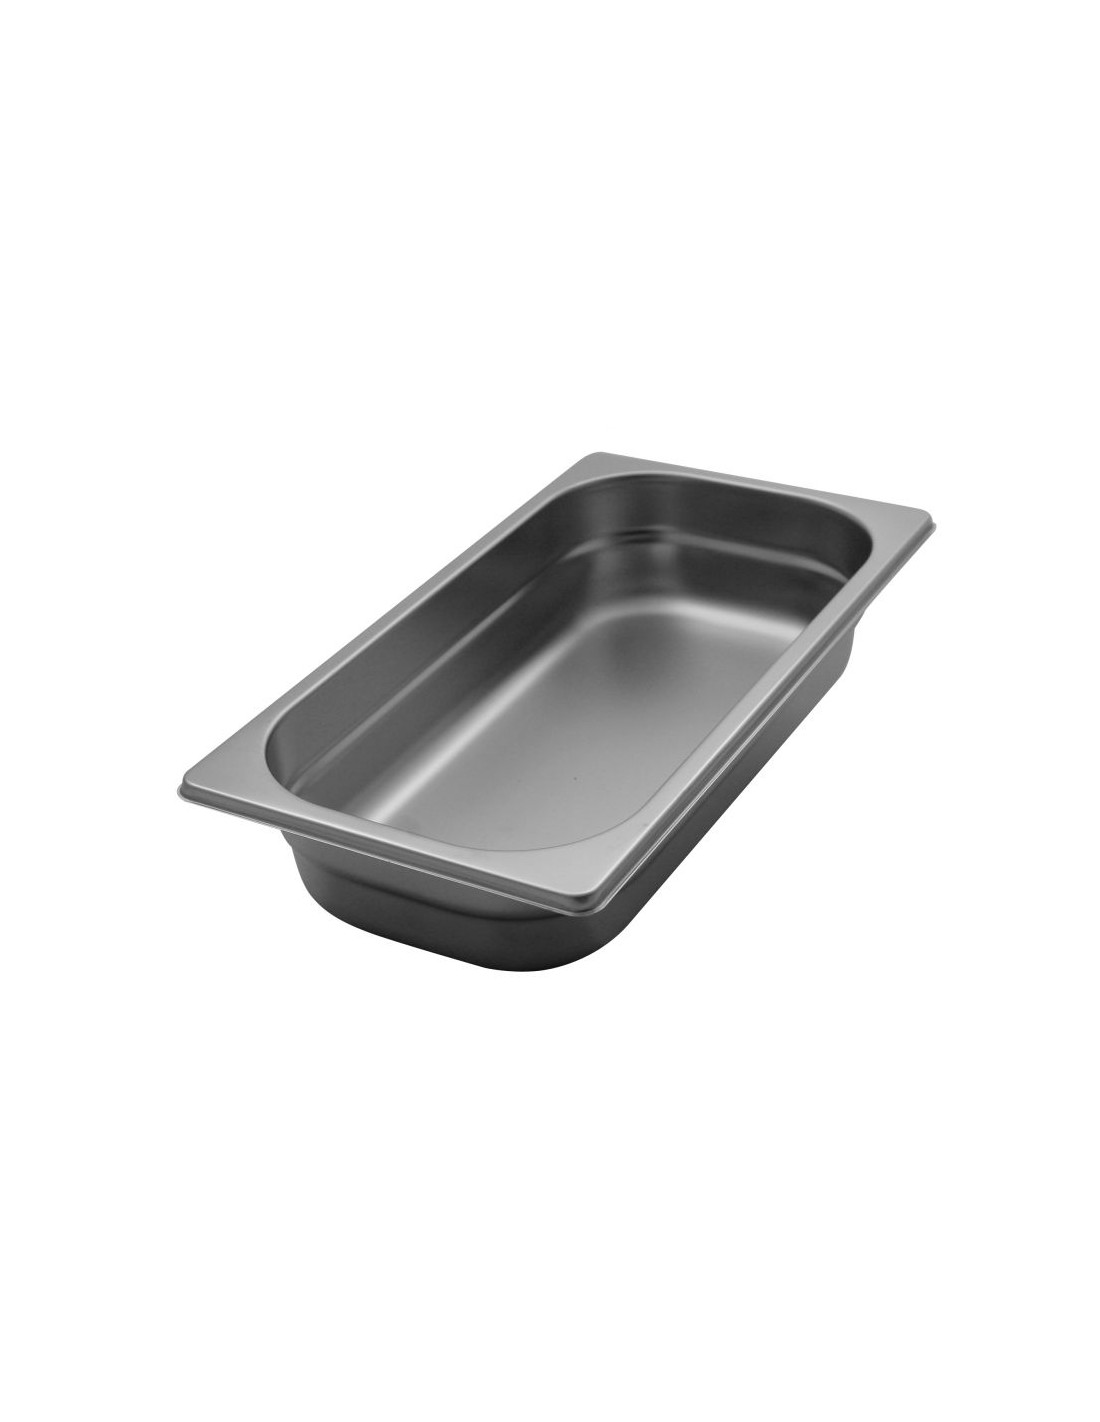 Stainless steel gastronorm containers 1/3 H. 6.5 cm - Capacity 2.5 liters - Dimensions 32.5 x 17.6 cm